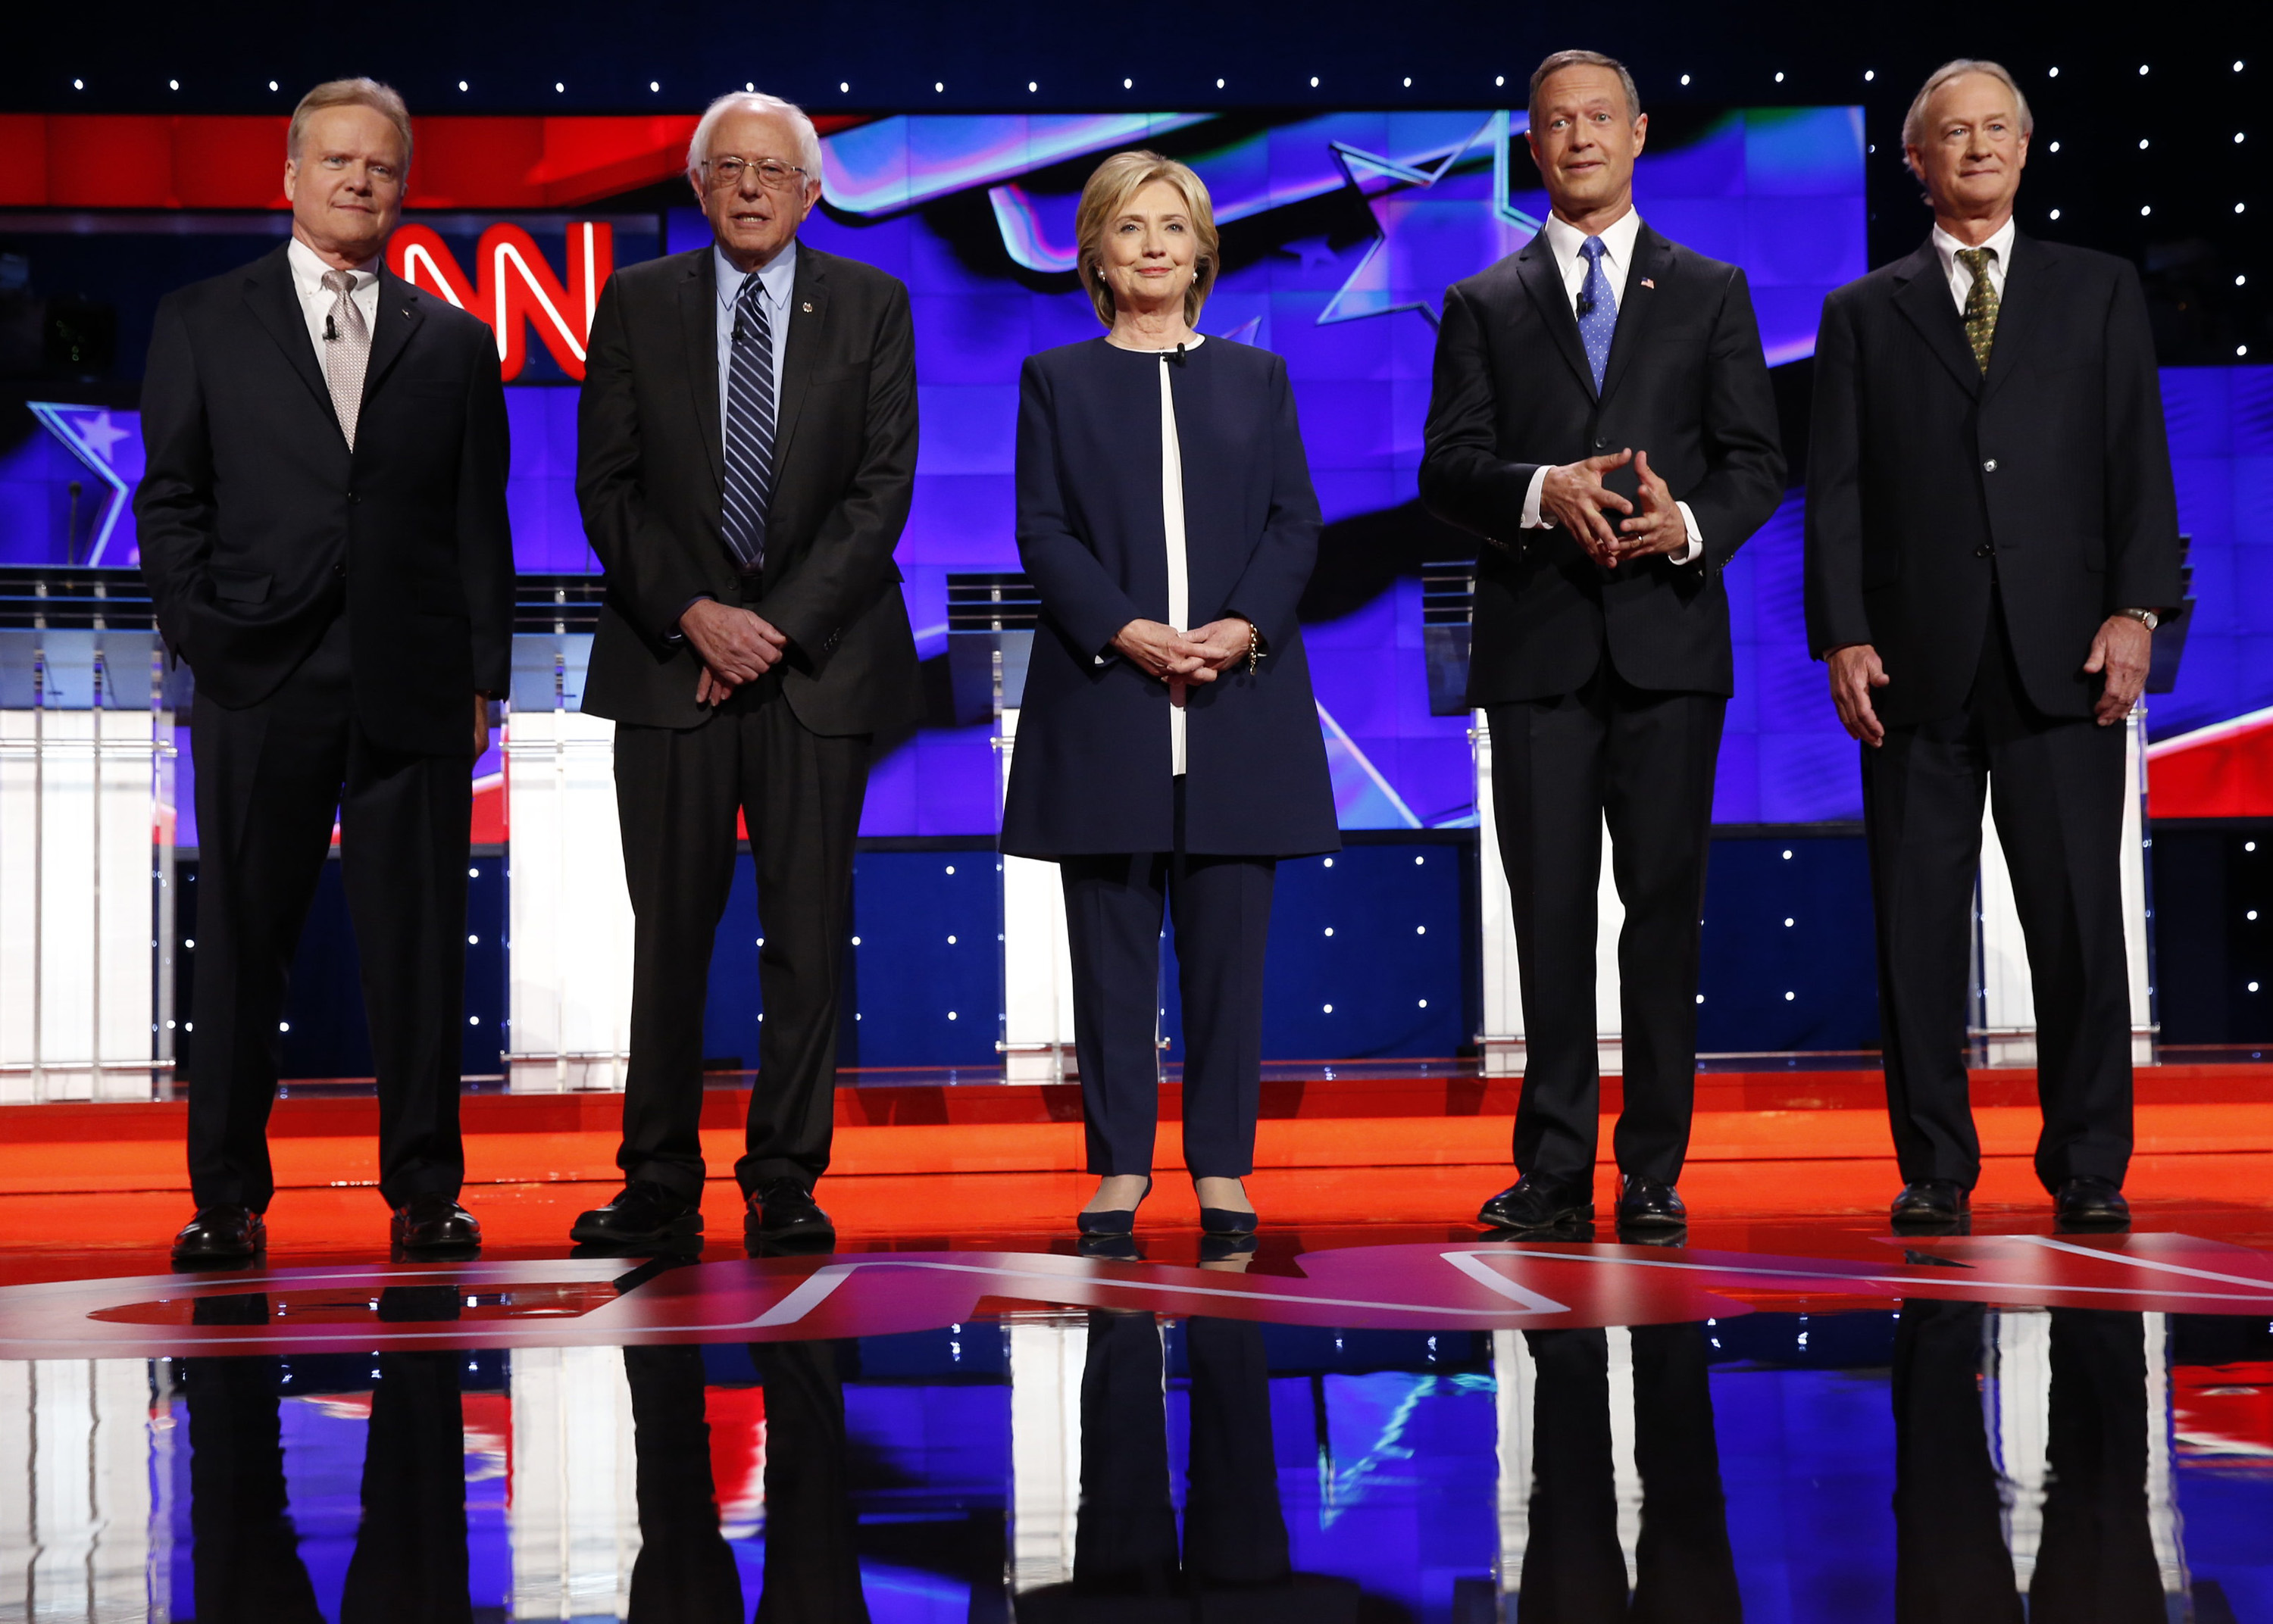 From left, Democratic presidential candidates Jim Webb, Bernie Sanders, Hillary Rodham Clinton, Martin O'Malley and Lincoln Chafee on the debate stage on Tuesday, Oct. 13, 2015, in Las Vegas. (Josh Haner/NYT/Pool via Zuma Press/TNS)